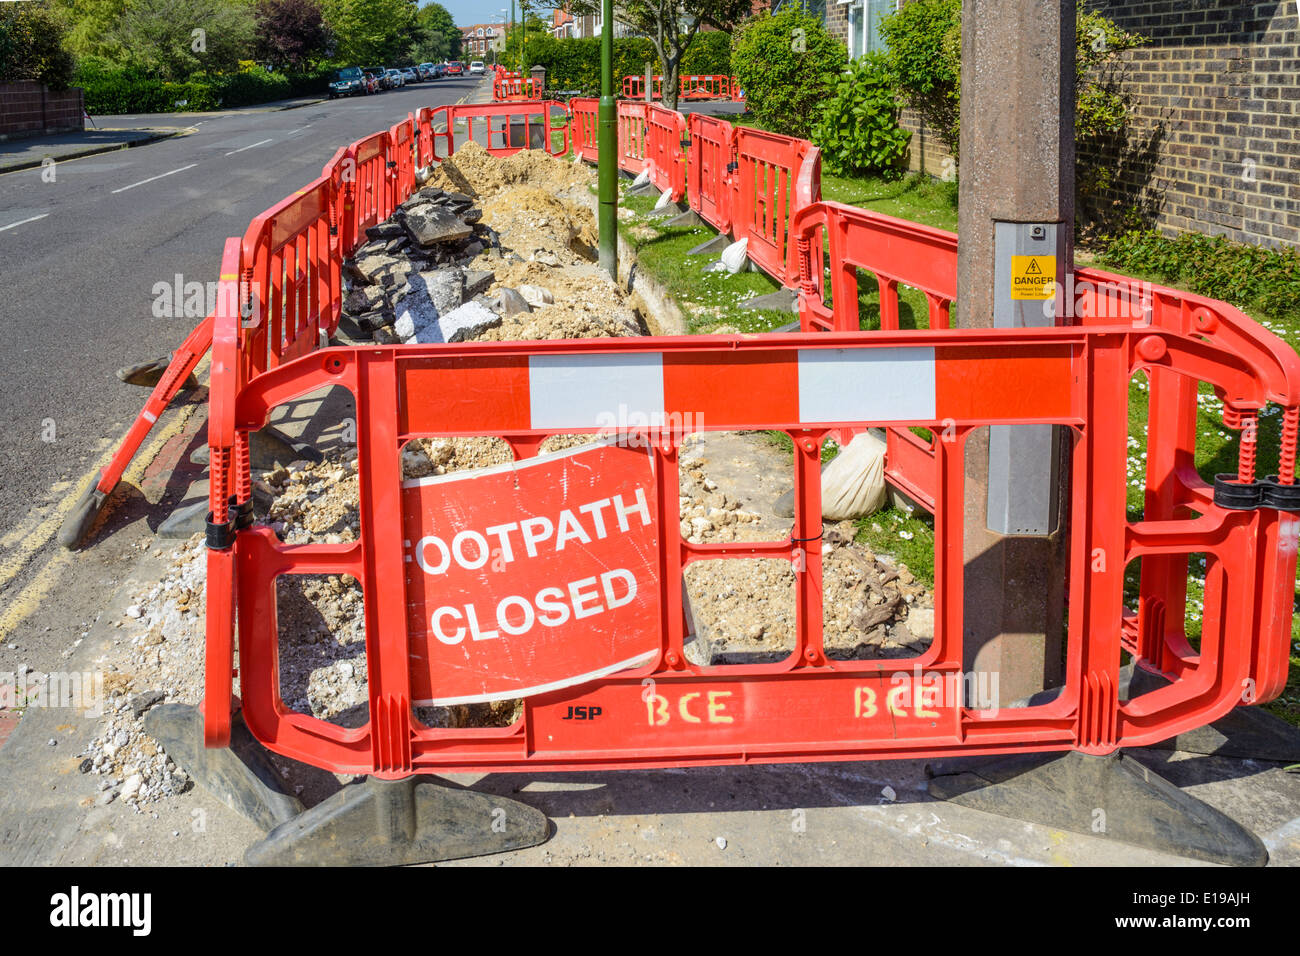 Footpath closed and red barriers up where pavement repair work is in progress on a path in the UK. Stock Photo